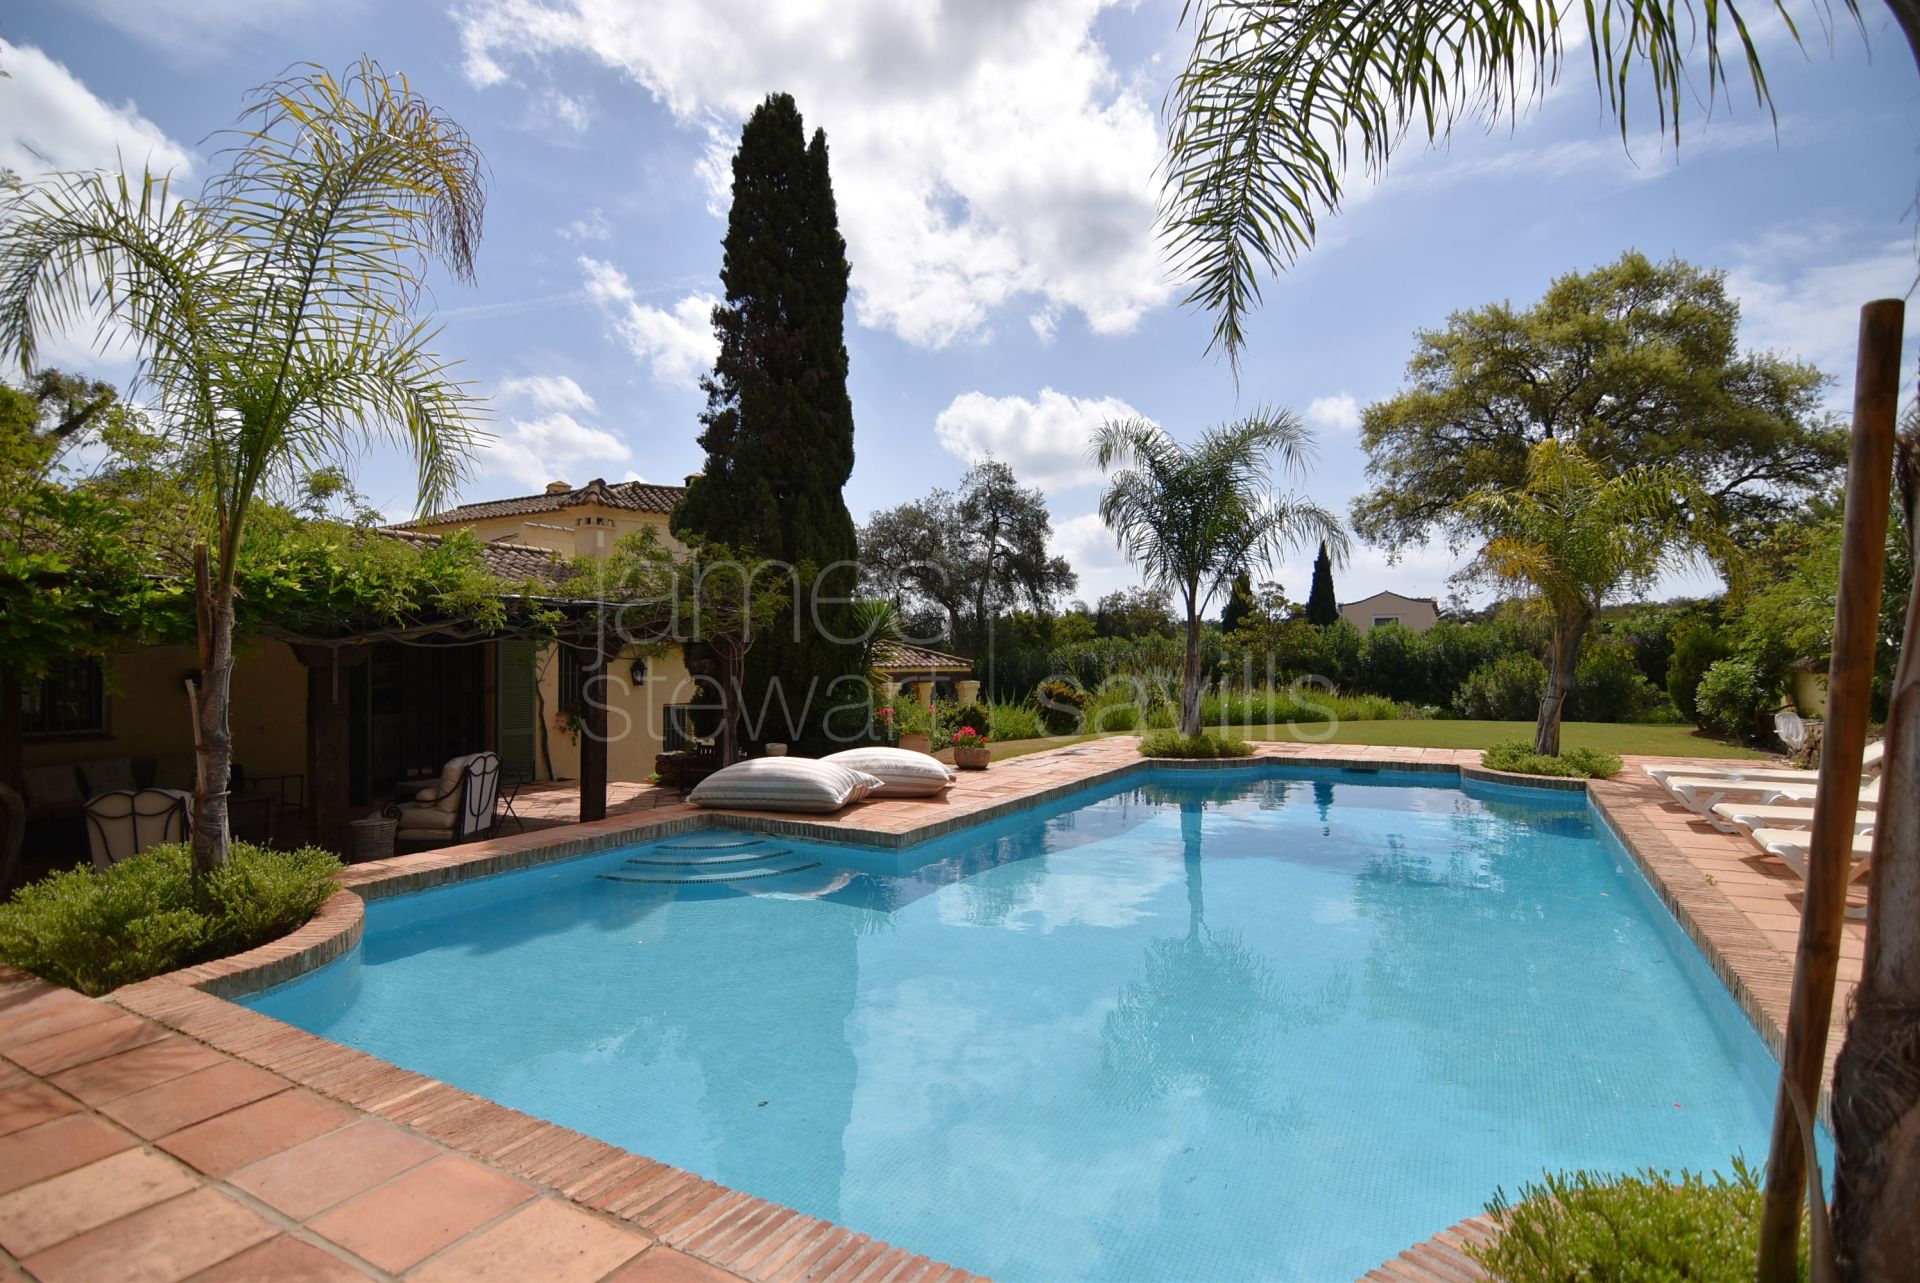 Looking for a country house a few minutes from the coast - here it is in the heart of Sotogrande